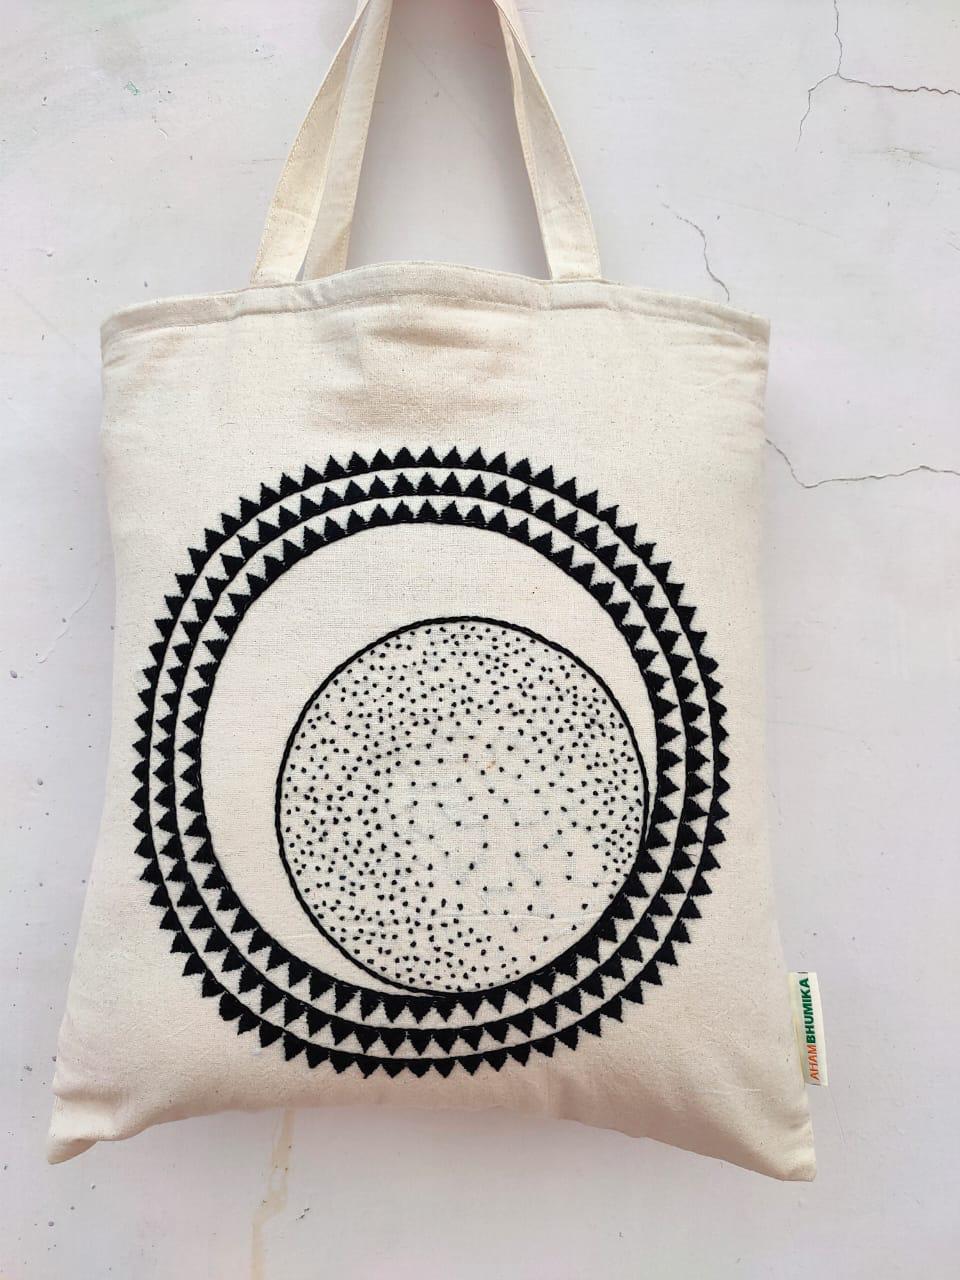 The Moon - Embroidered Tote Bag